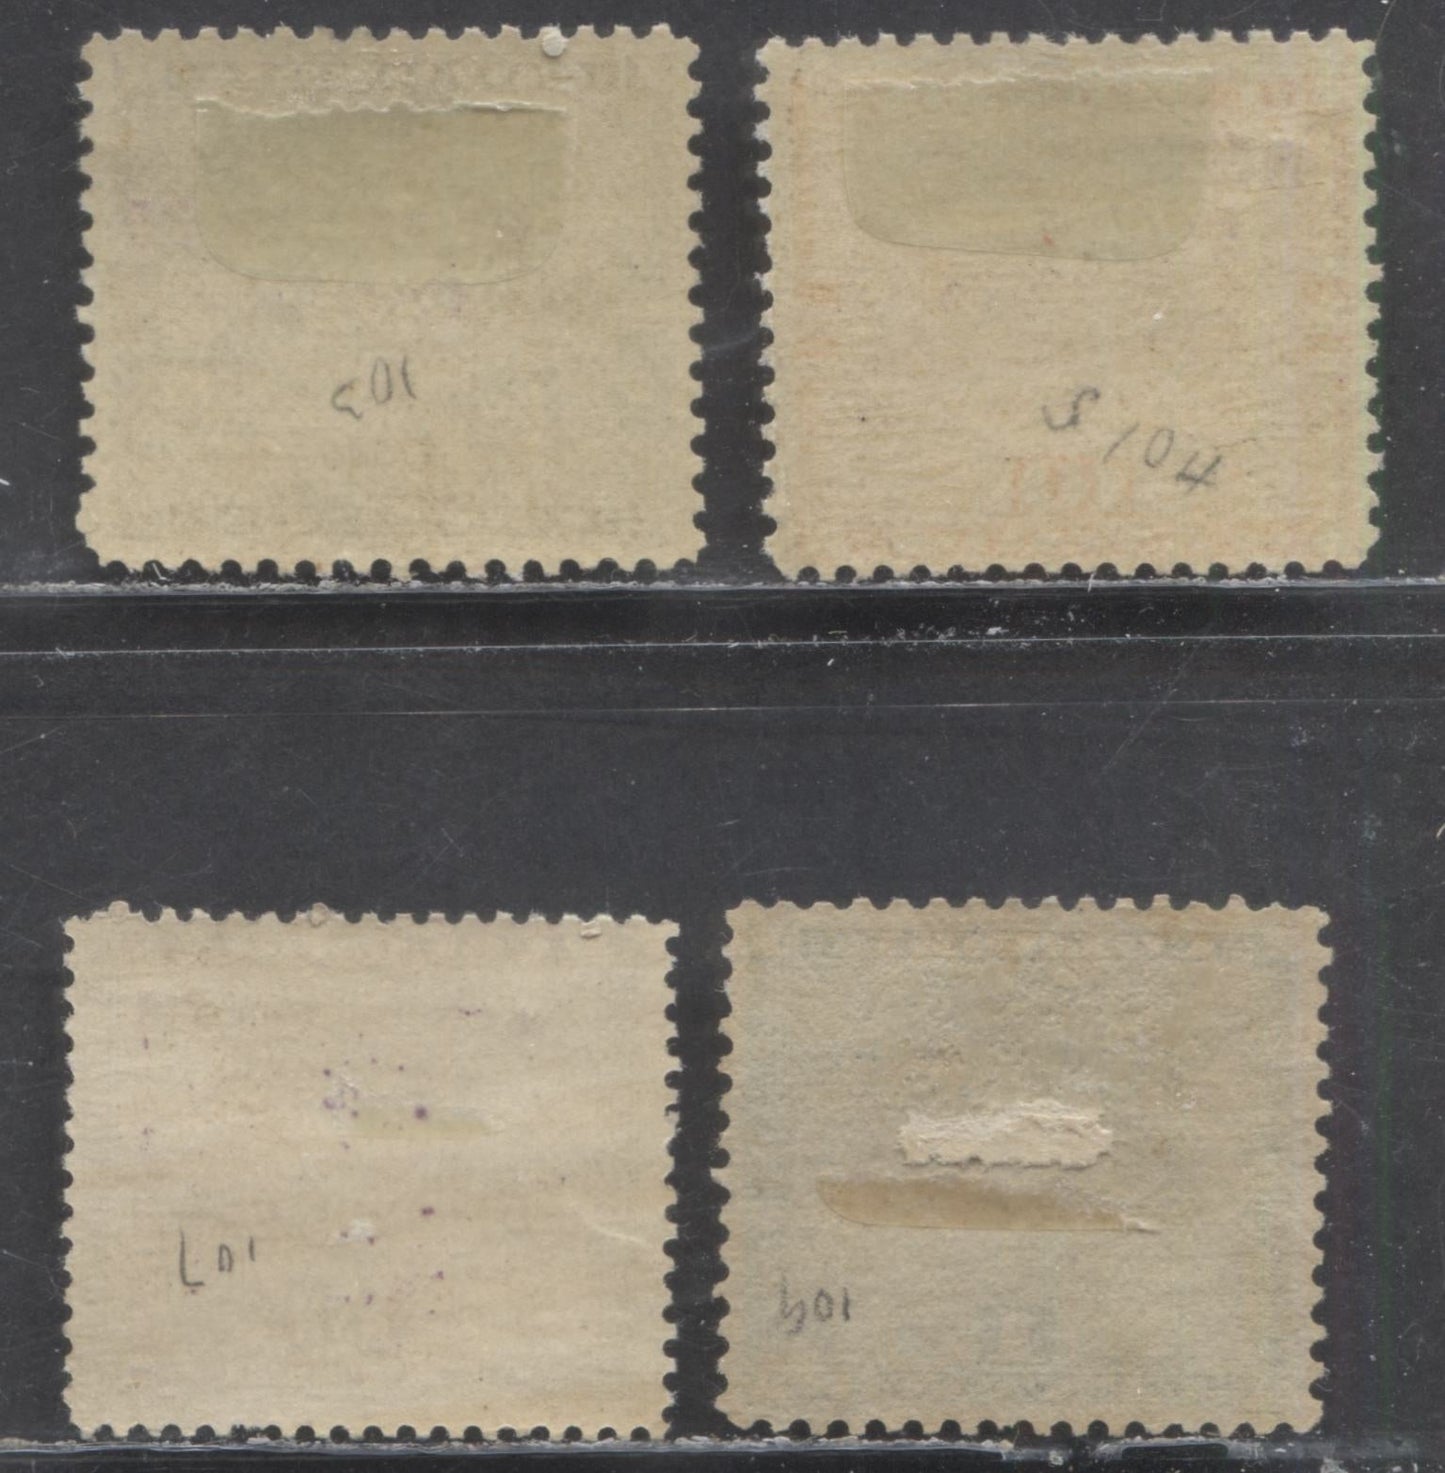 Lot 101 Panama SC#103/109 1903-1904 Colon Overprints, 4 Fine/Very Fine Unused & Disturbed Gum Singles, Click on Listing to See ALL Pictures, Estimated Value $20 USD